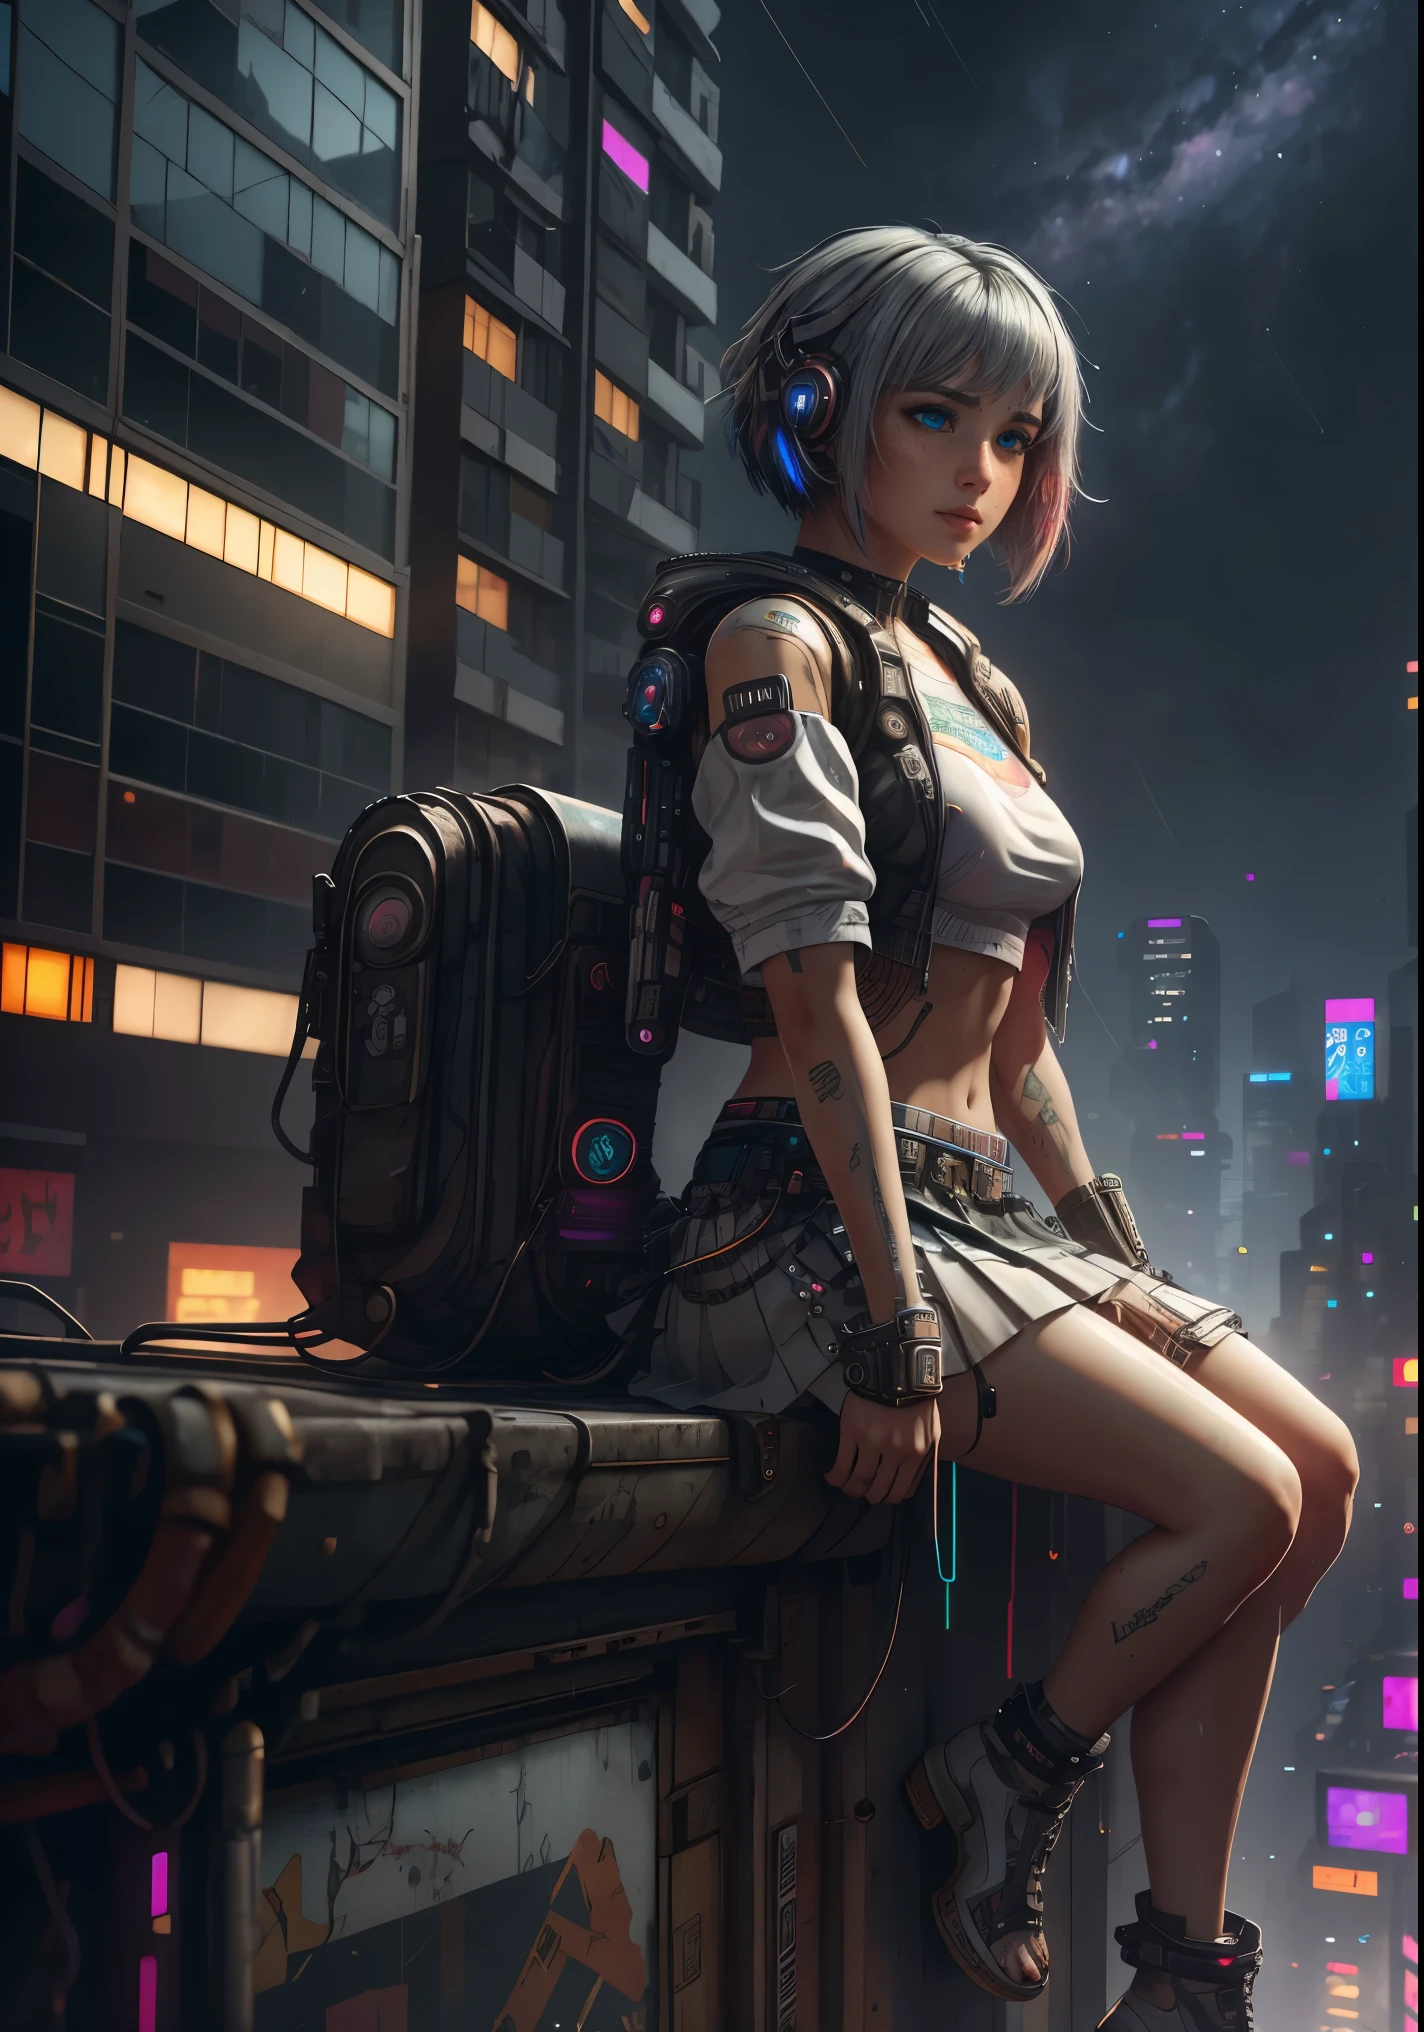 (realism), (portrait of a girl sitting legs dangling on a edge roof ledge), (rain drop), (sweat see through white frilled shirt:1.3), (pleated skirt:1.3), (rainy city), (dusk, the milky way in the sky:1.45), (small breasts), photoreal, (beautiful sky, starry), (masterpiece), (soaking wet), (sexy:1.3), (cyberpunk slums:1.5), (cyberpunk slums on top), (cyberpunk 2077), beautiful neon city, ((gray hair, multicolored eyes, multicolored hair, bob cut, short hair with long strands))